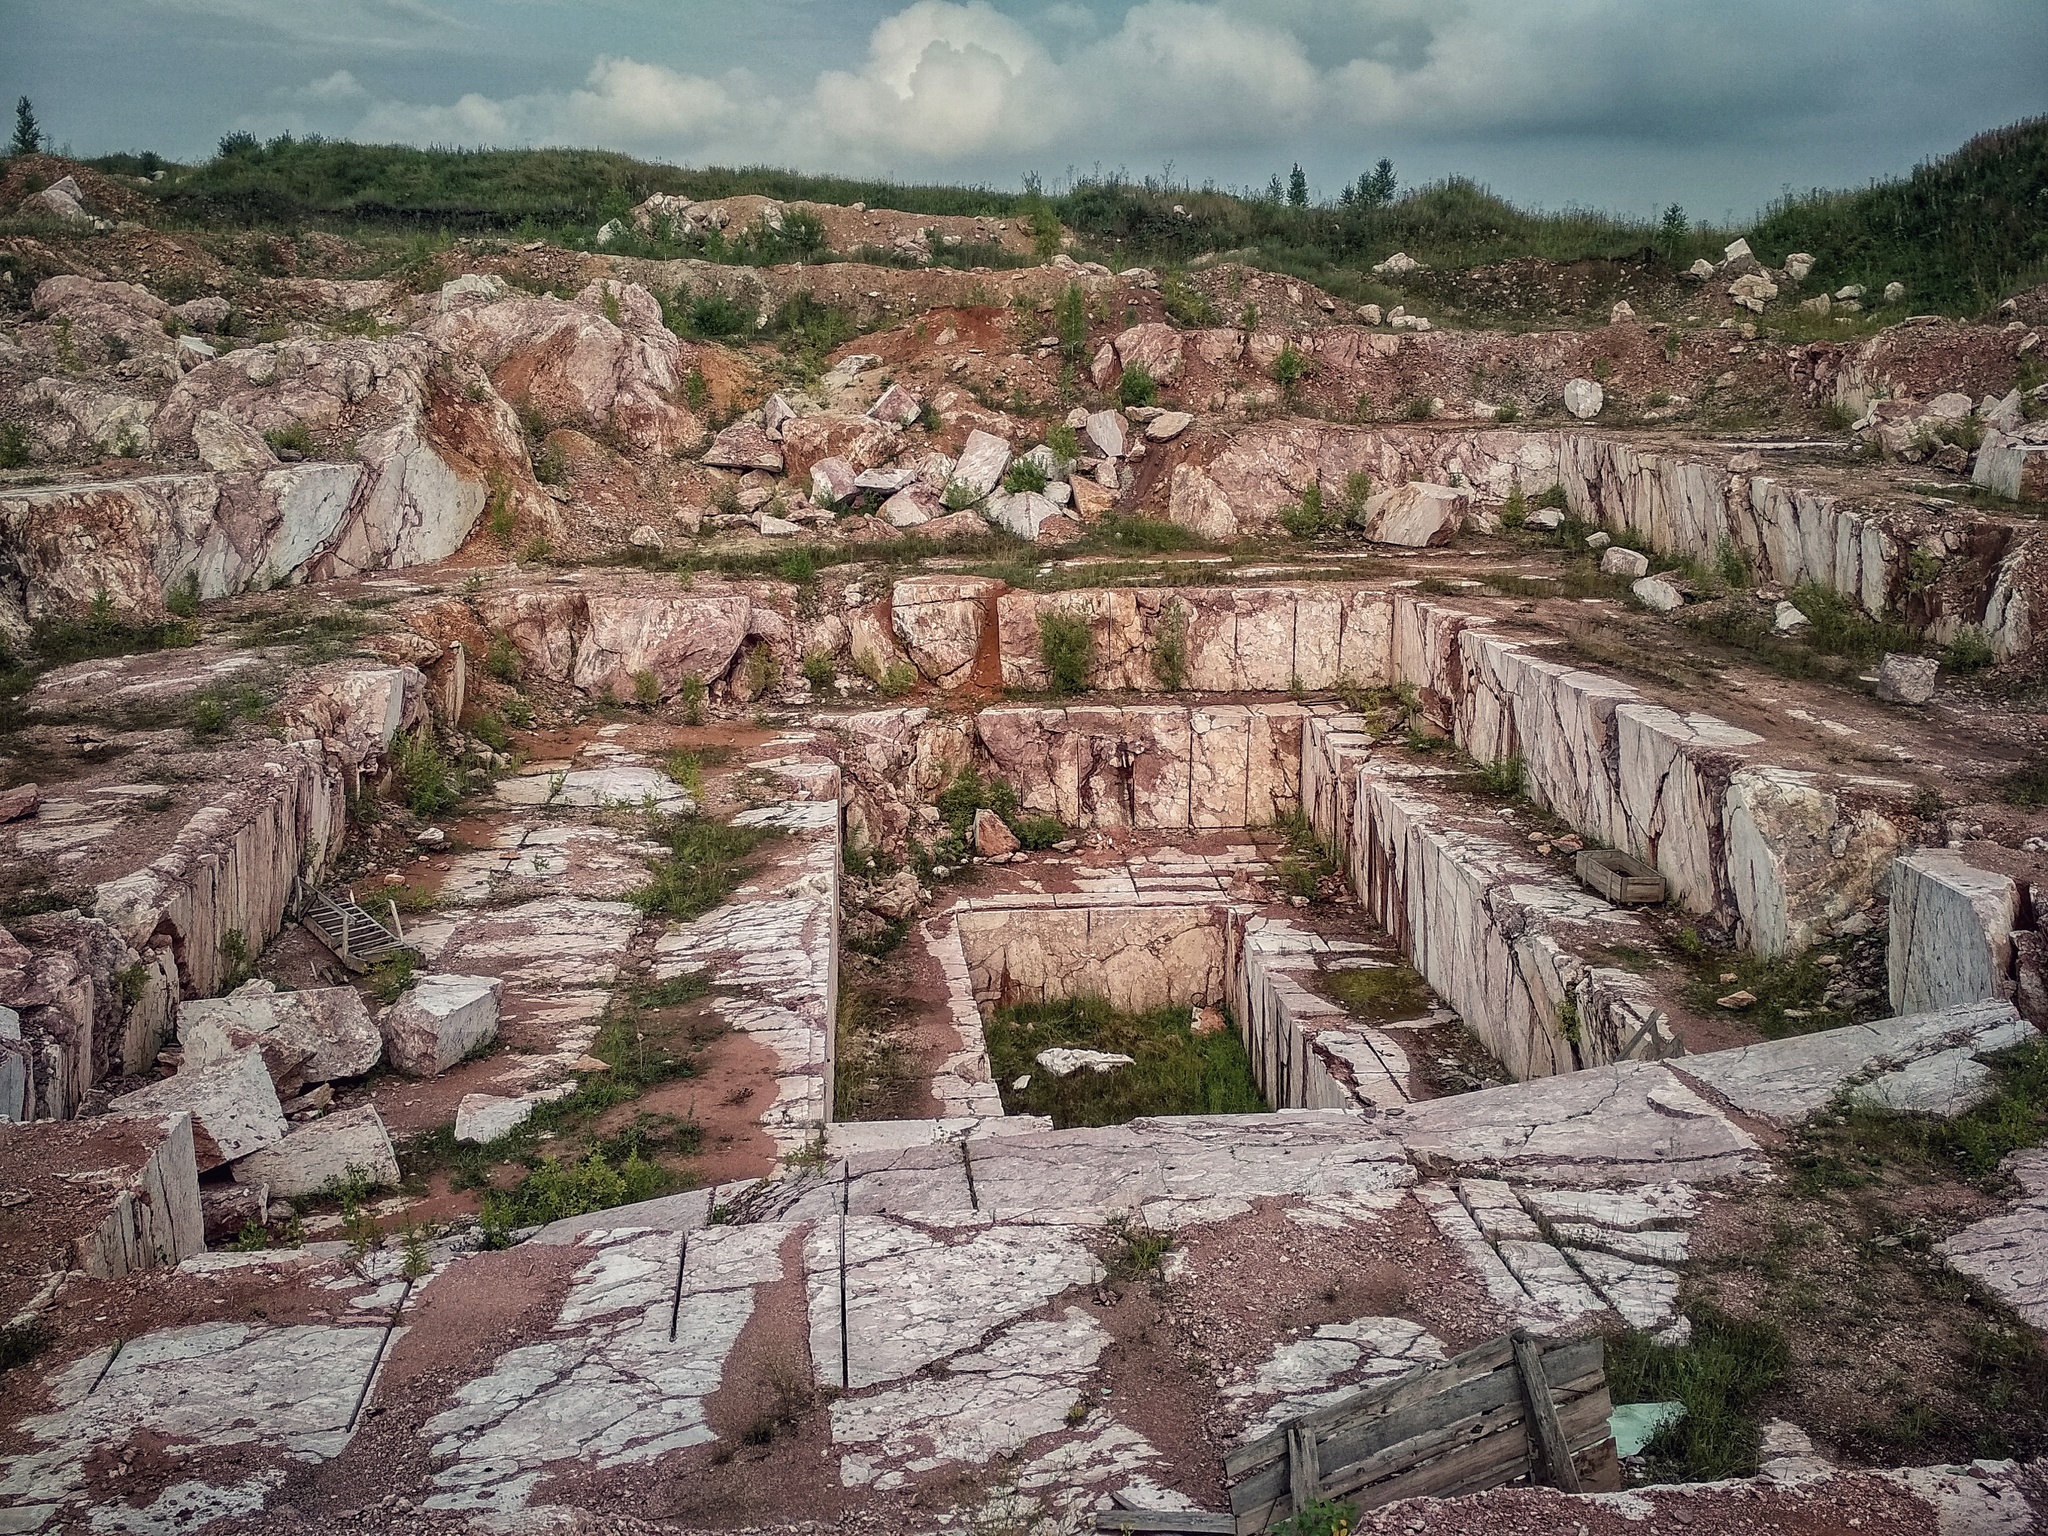 Abandoned marble quarry - Quadcopter, Longpost, Copter, Marble, Fuck aesthetics, Abandoned, Career, The photo, My